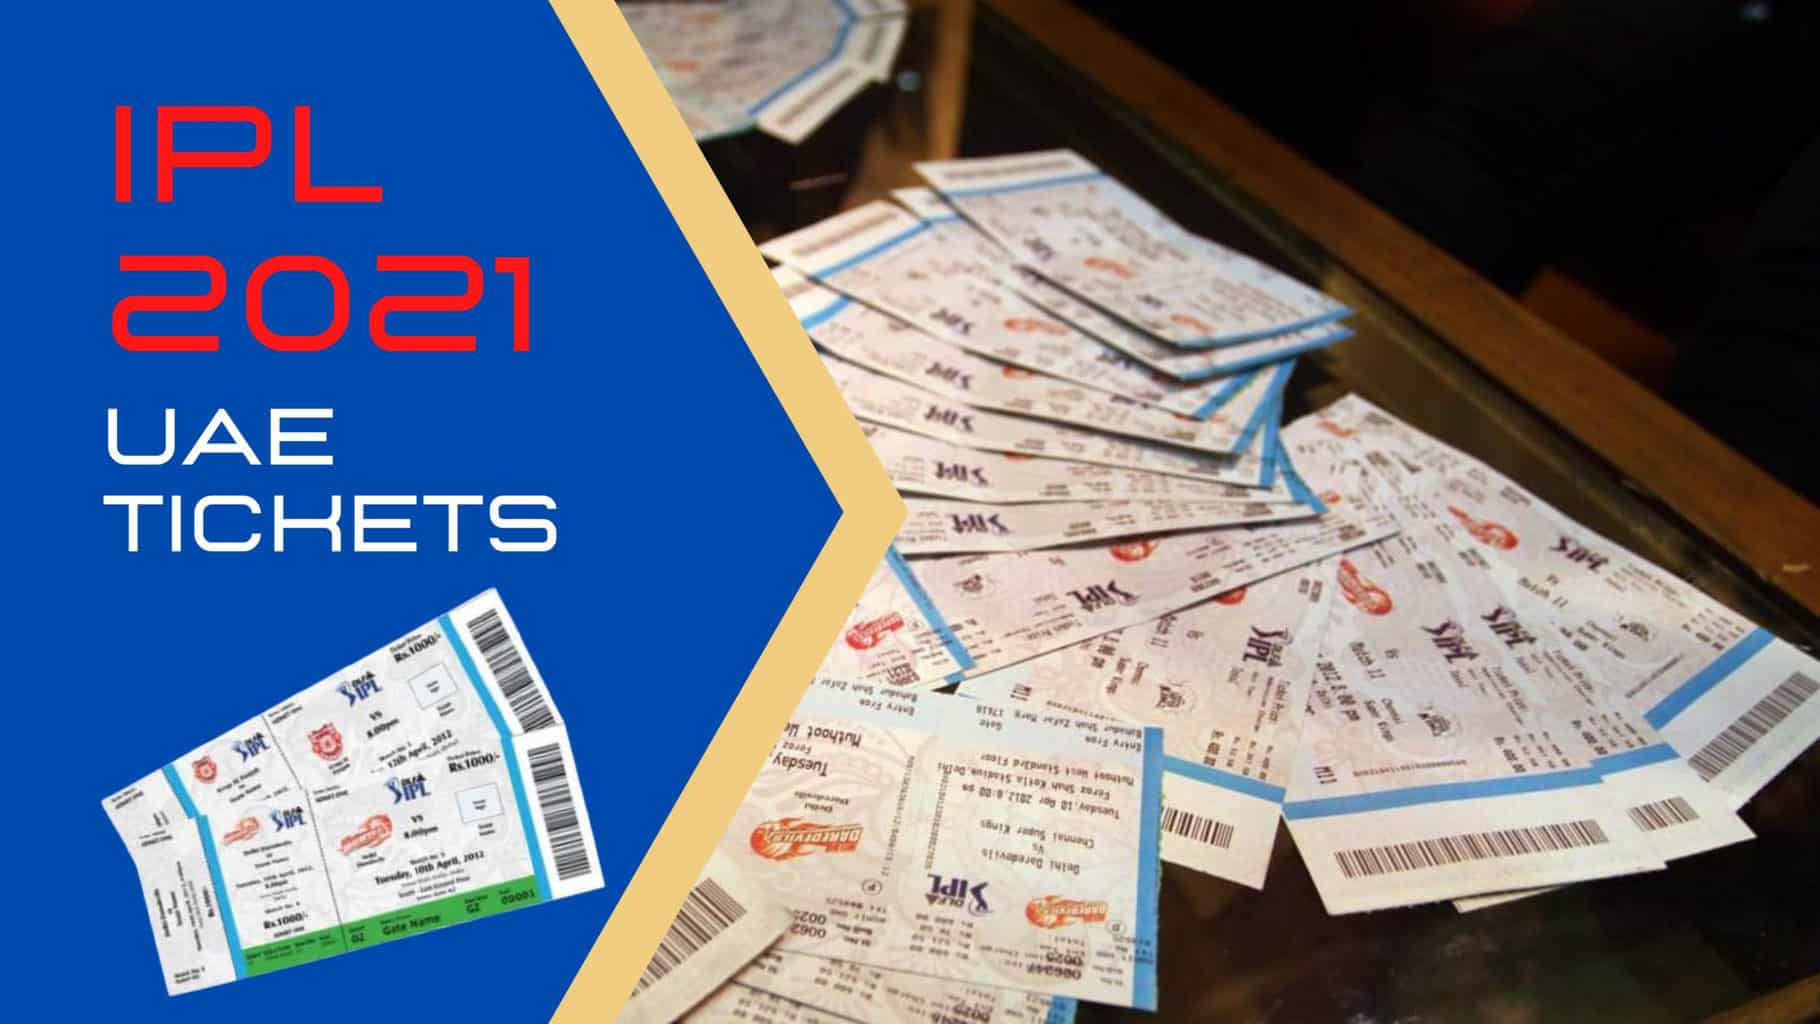 How To Buy IPL 2021 UAE Tickets Online - Step By Step Guide